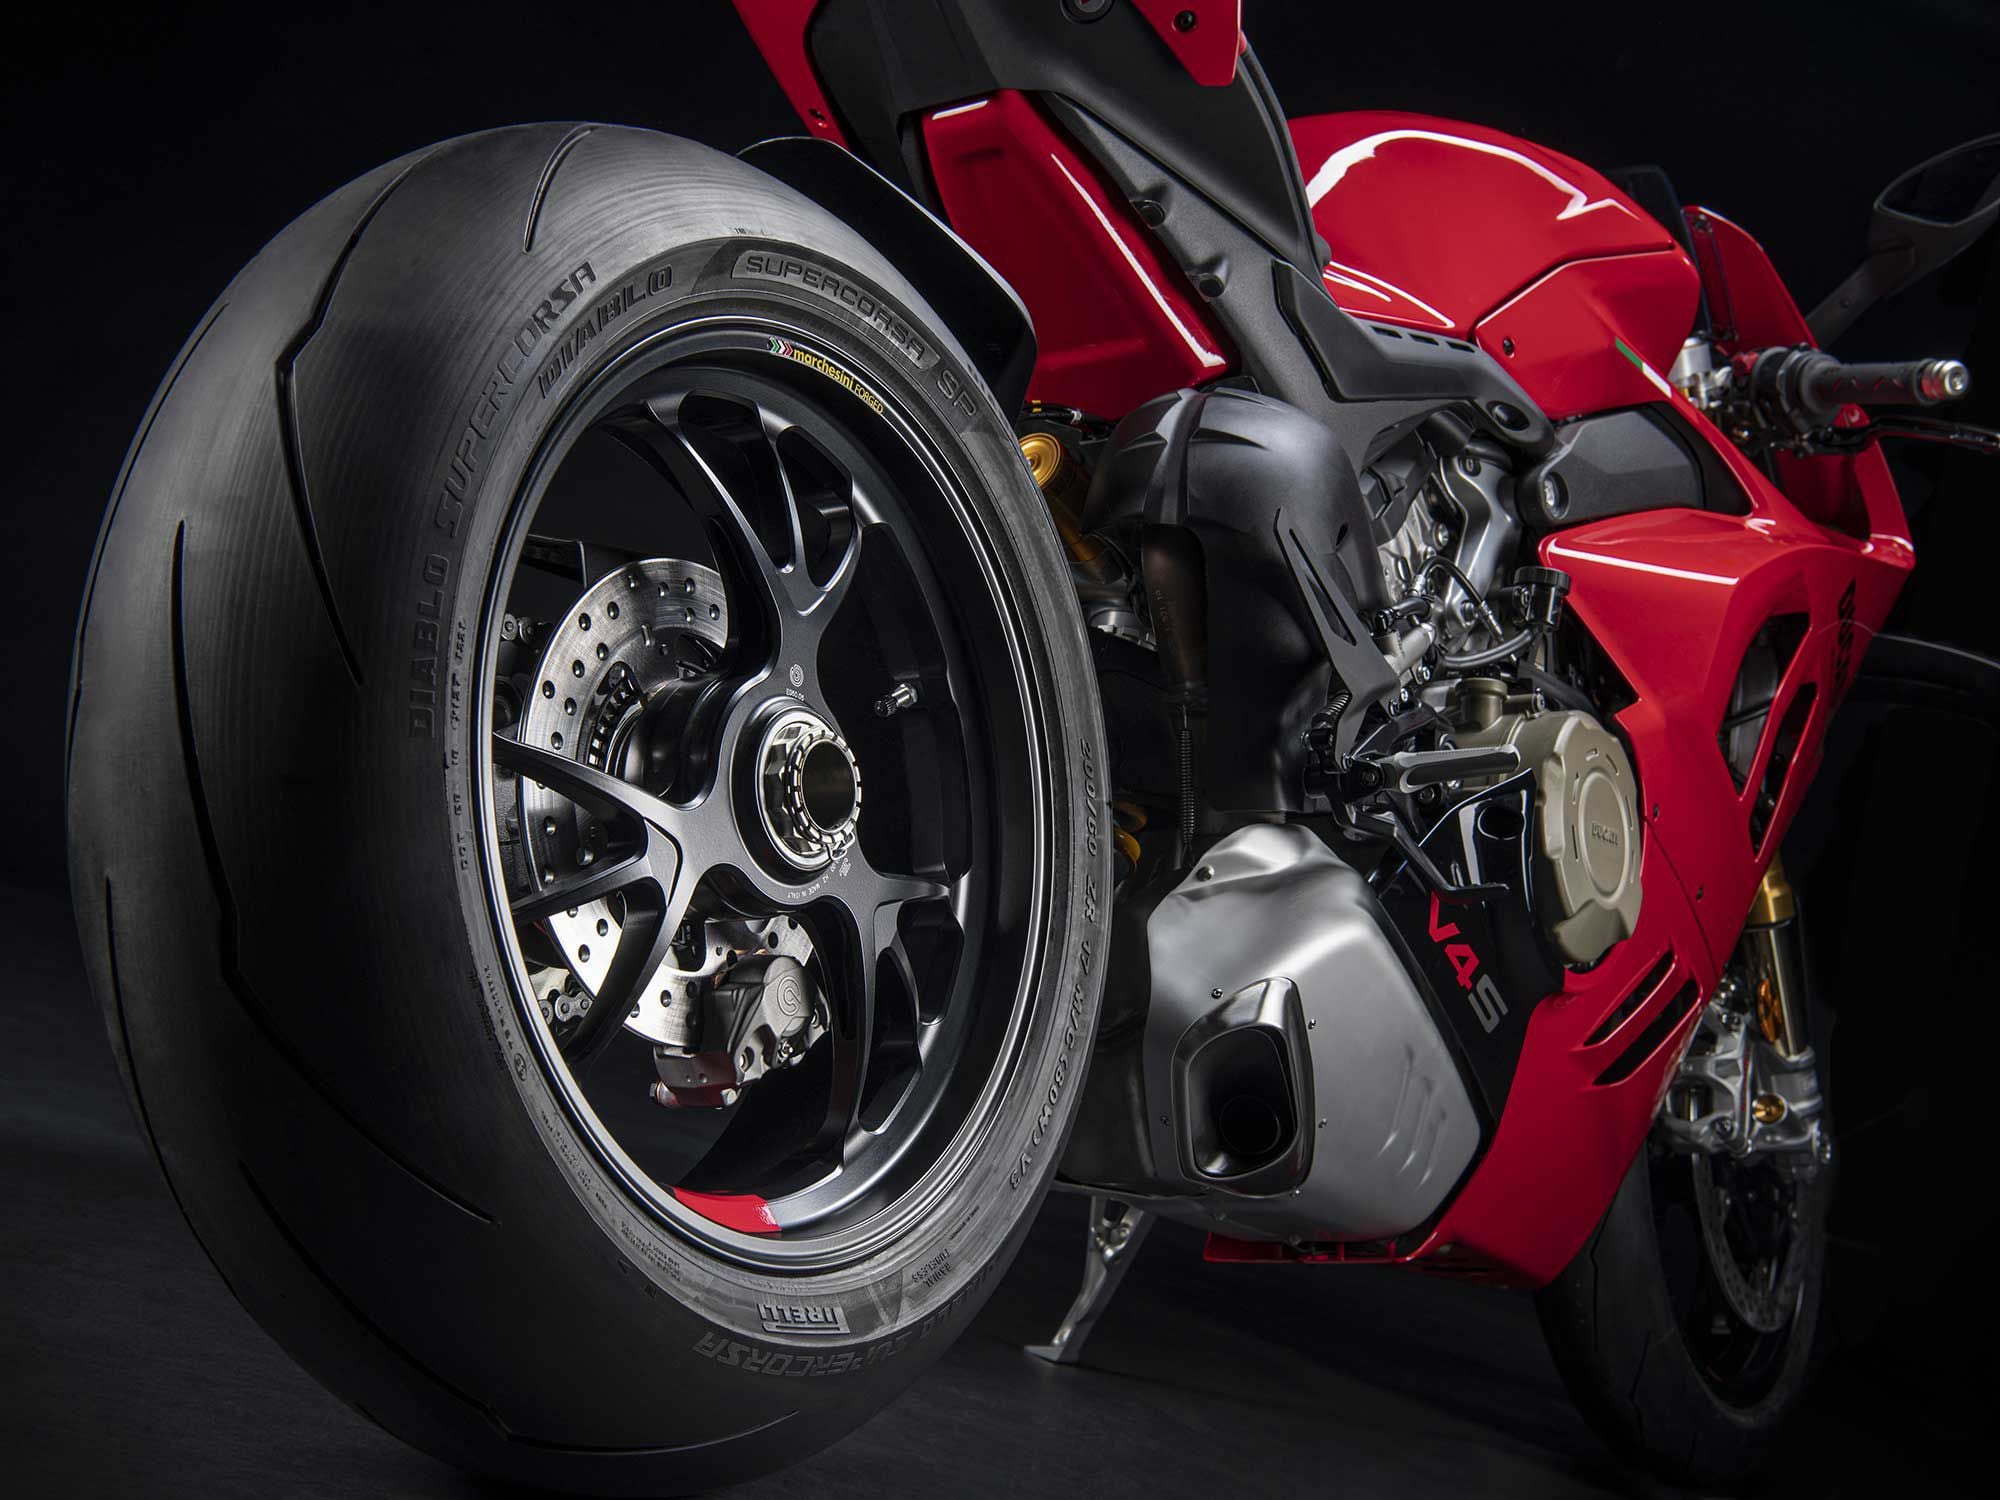 The single-sided swingarm’s pivot in the 2022 chassis is 4mm higher to counteract suspension squat under hard acceleration. And the Panigale V4 is more than capable of hard acceleration.